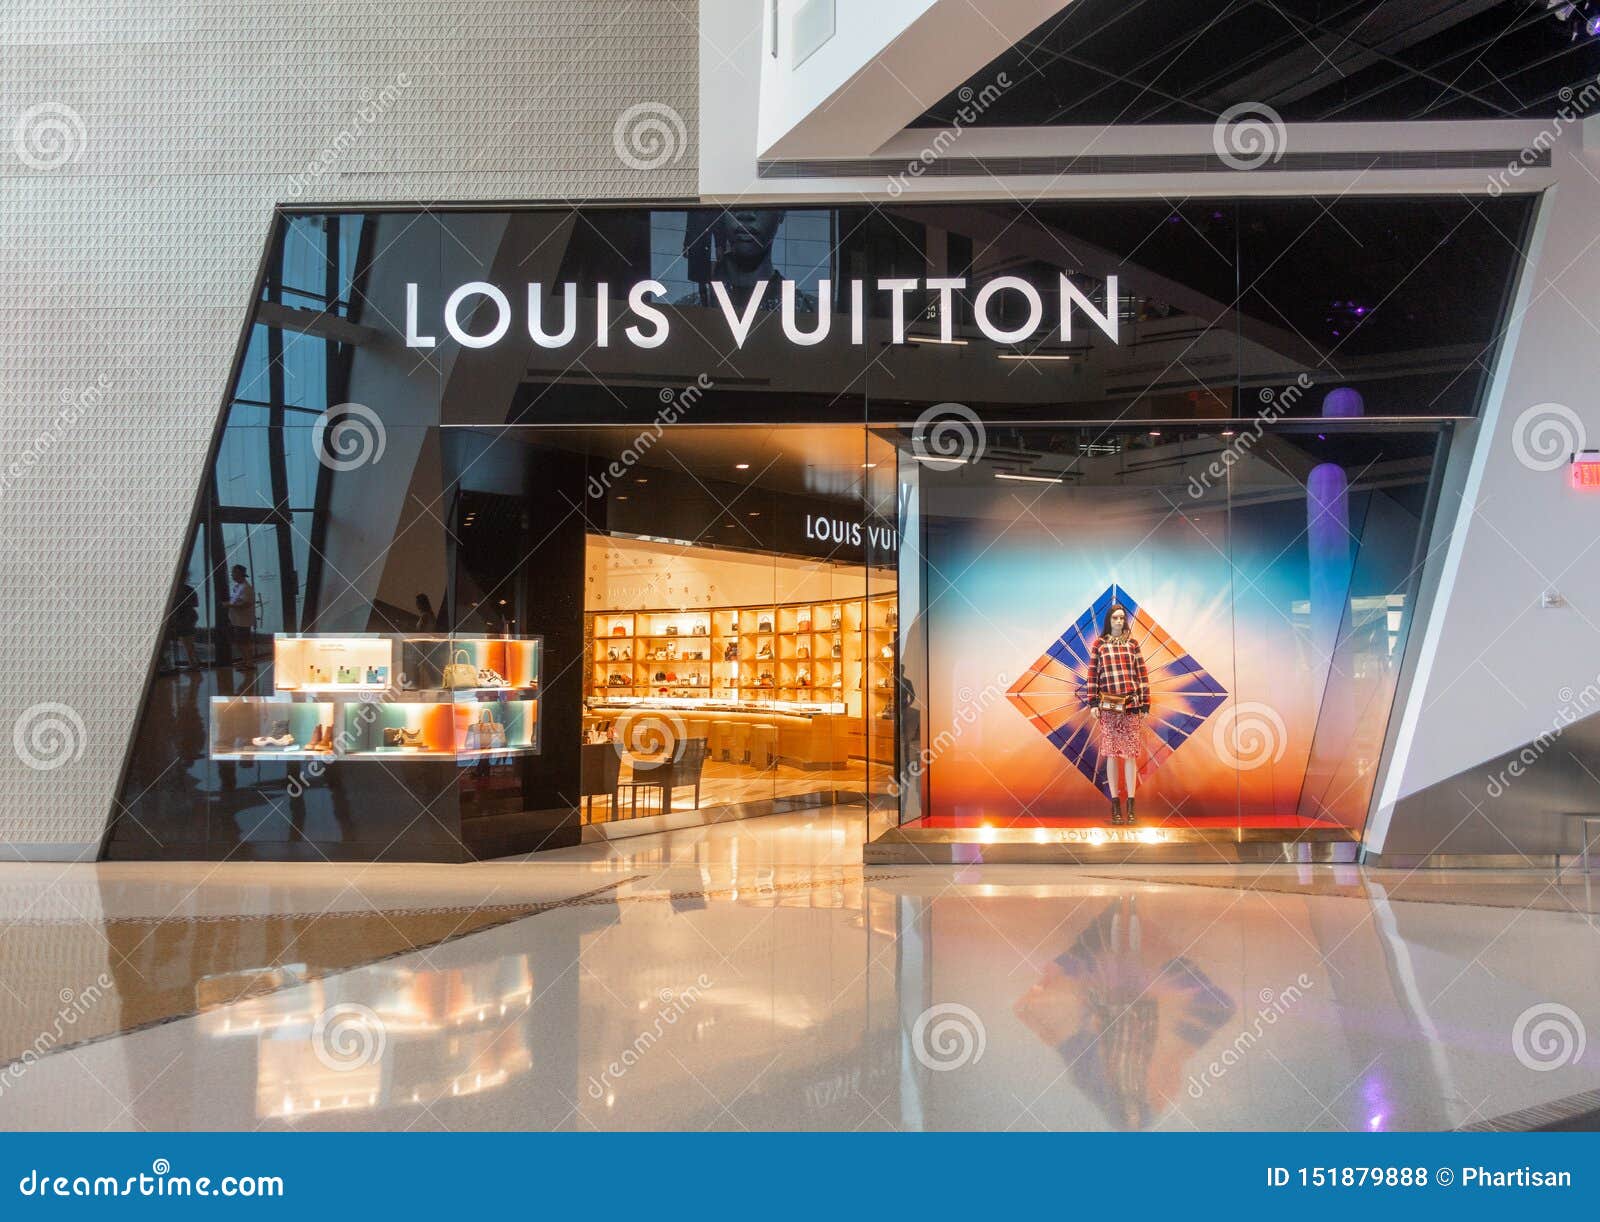 Louis Vuitton At The Shops At Crystals Editorial Stock Photo - Image of store, building: 151879888